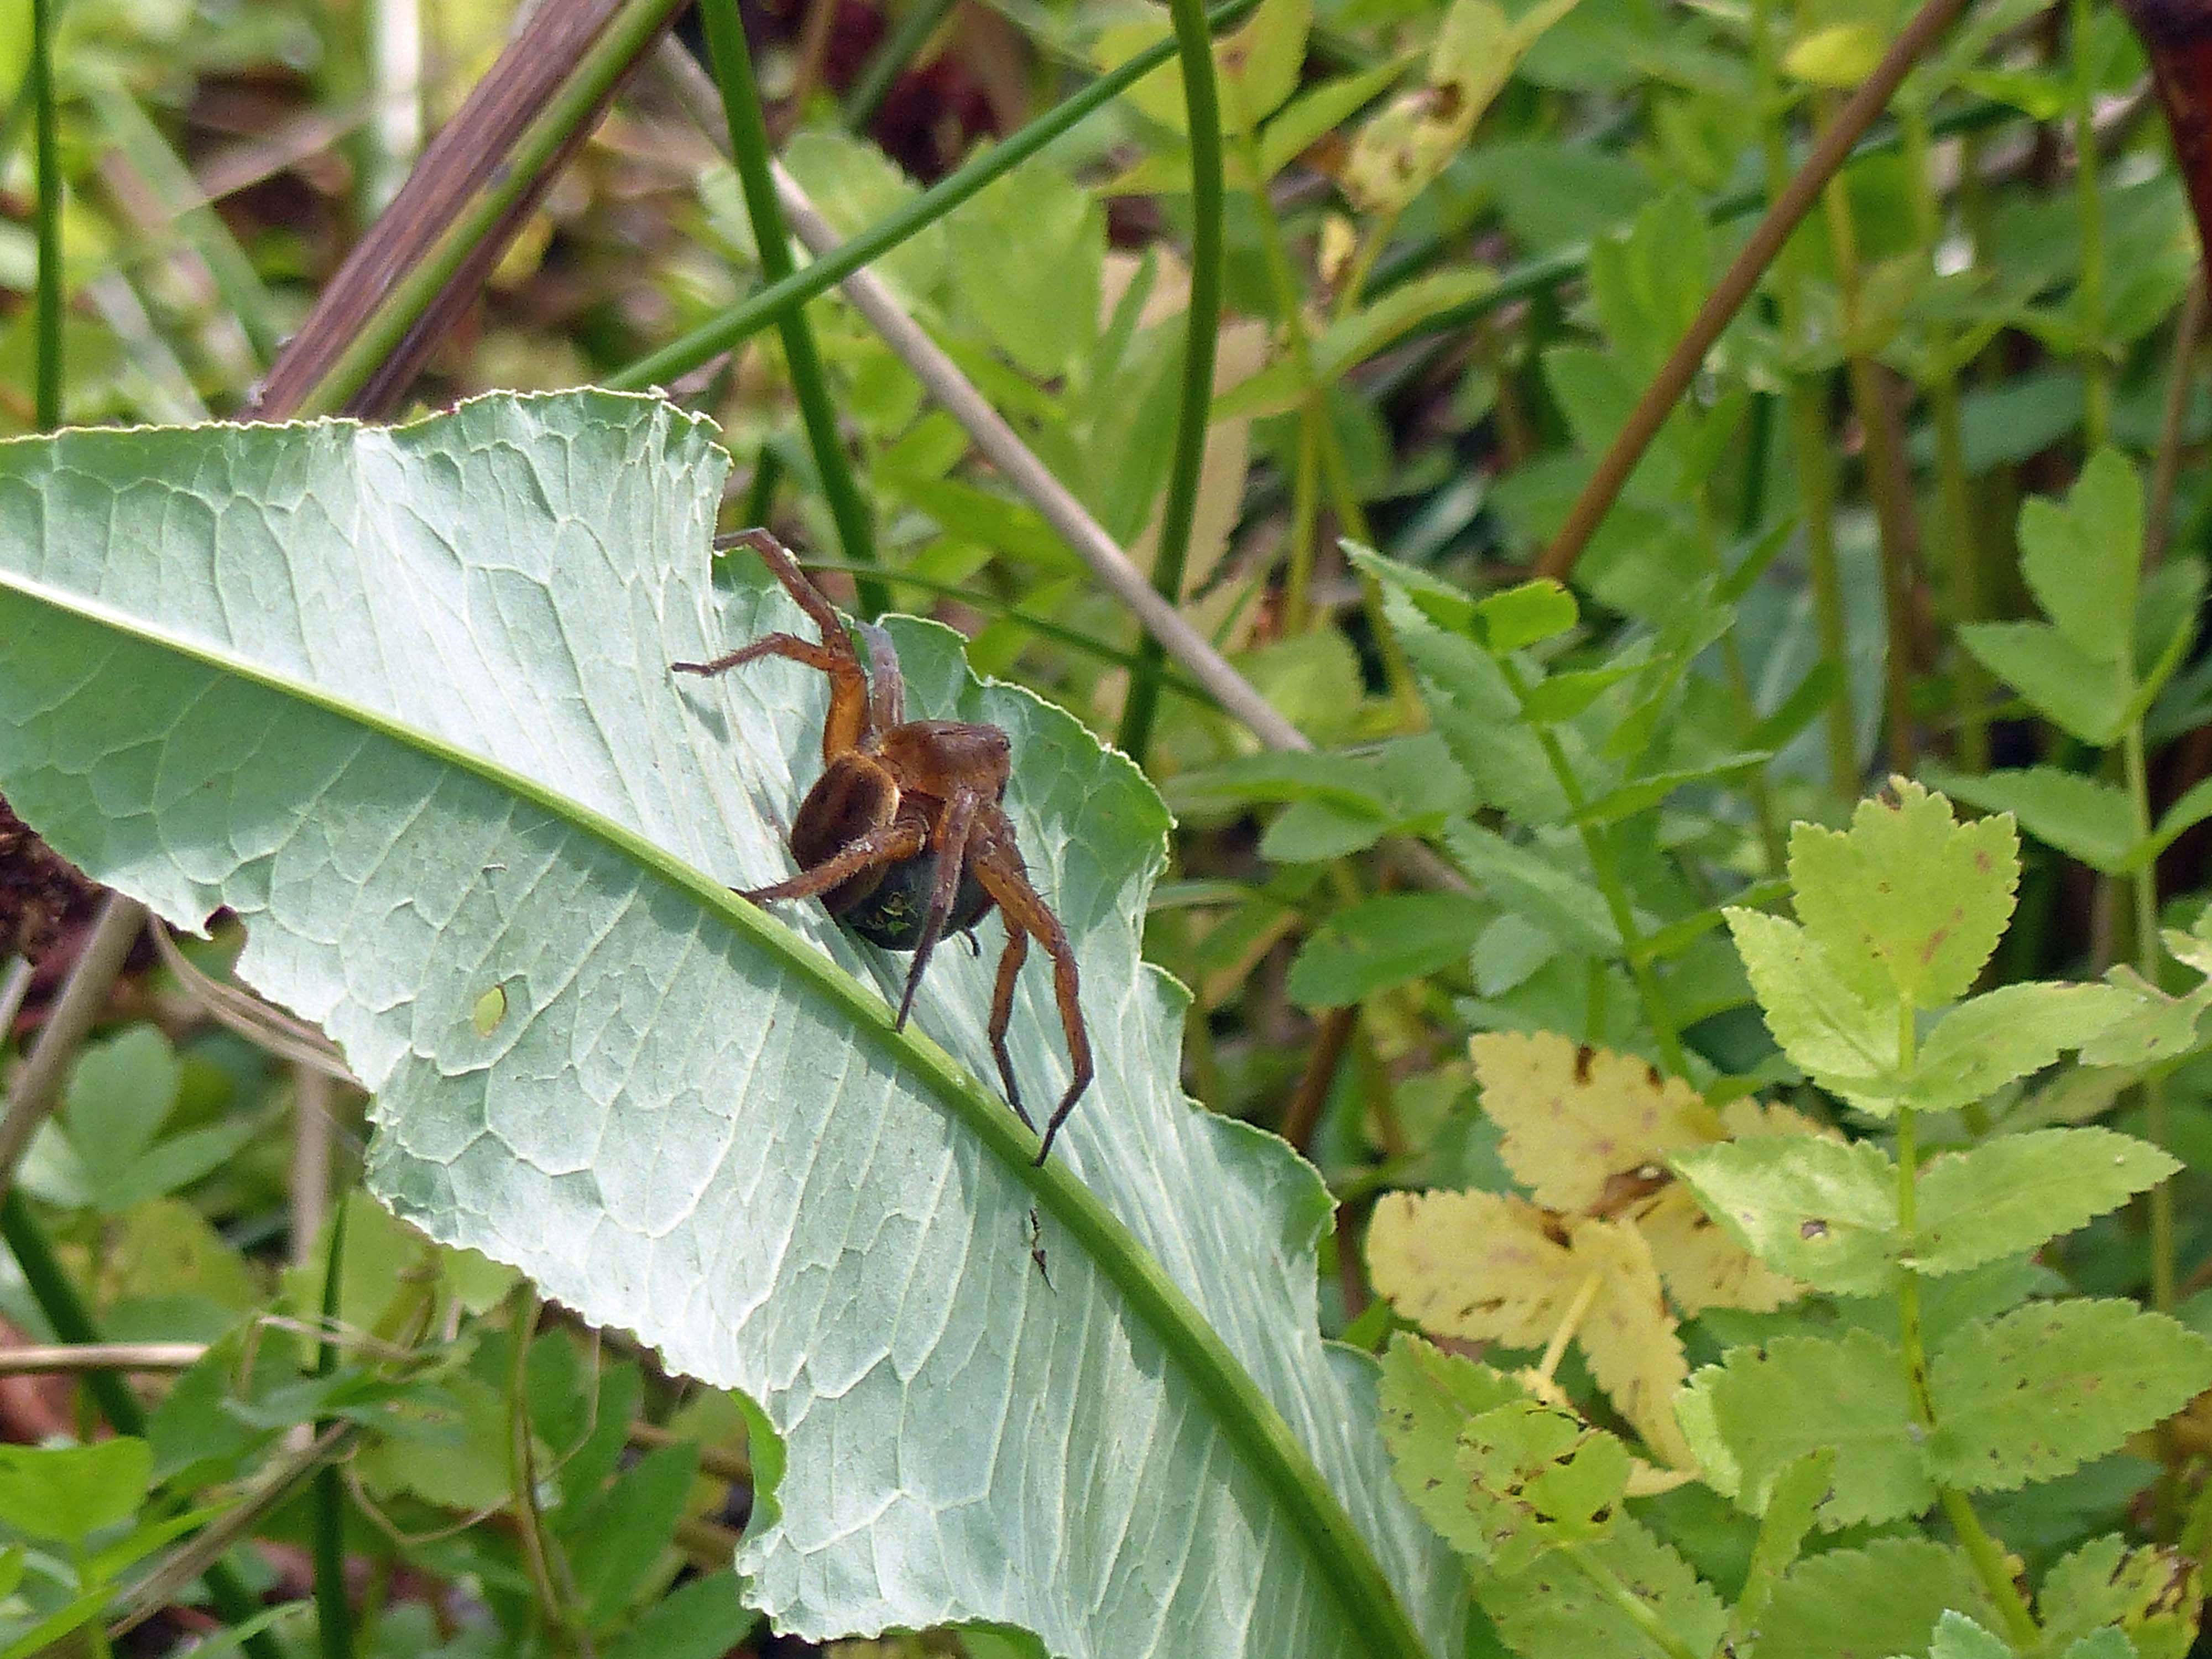 An unbanded female D. plantarius with her egg sac high above the water on a Rumex hydrolapathum leaf